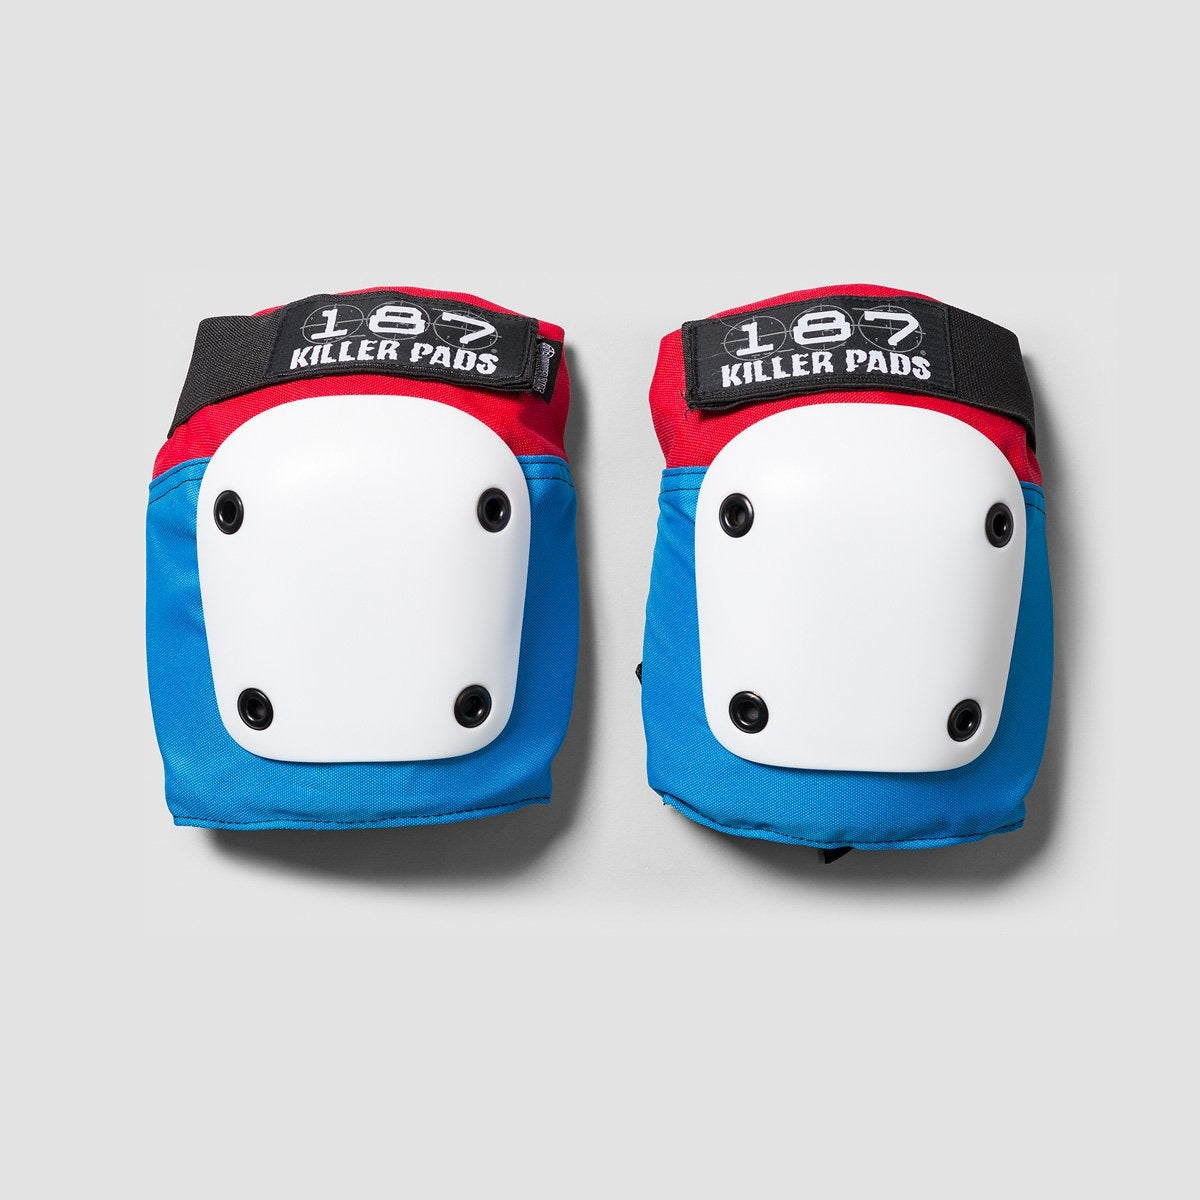 187 Killer Fly Knee Pads Red/White/Blue - Safety Gear